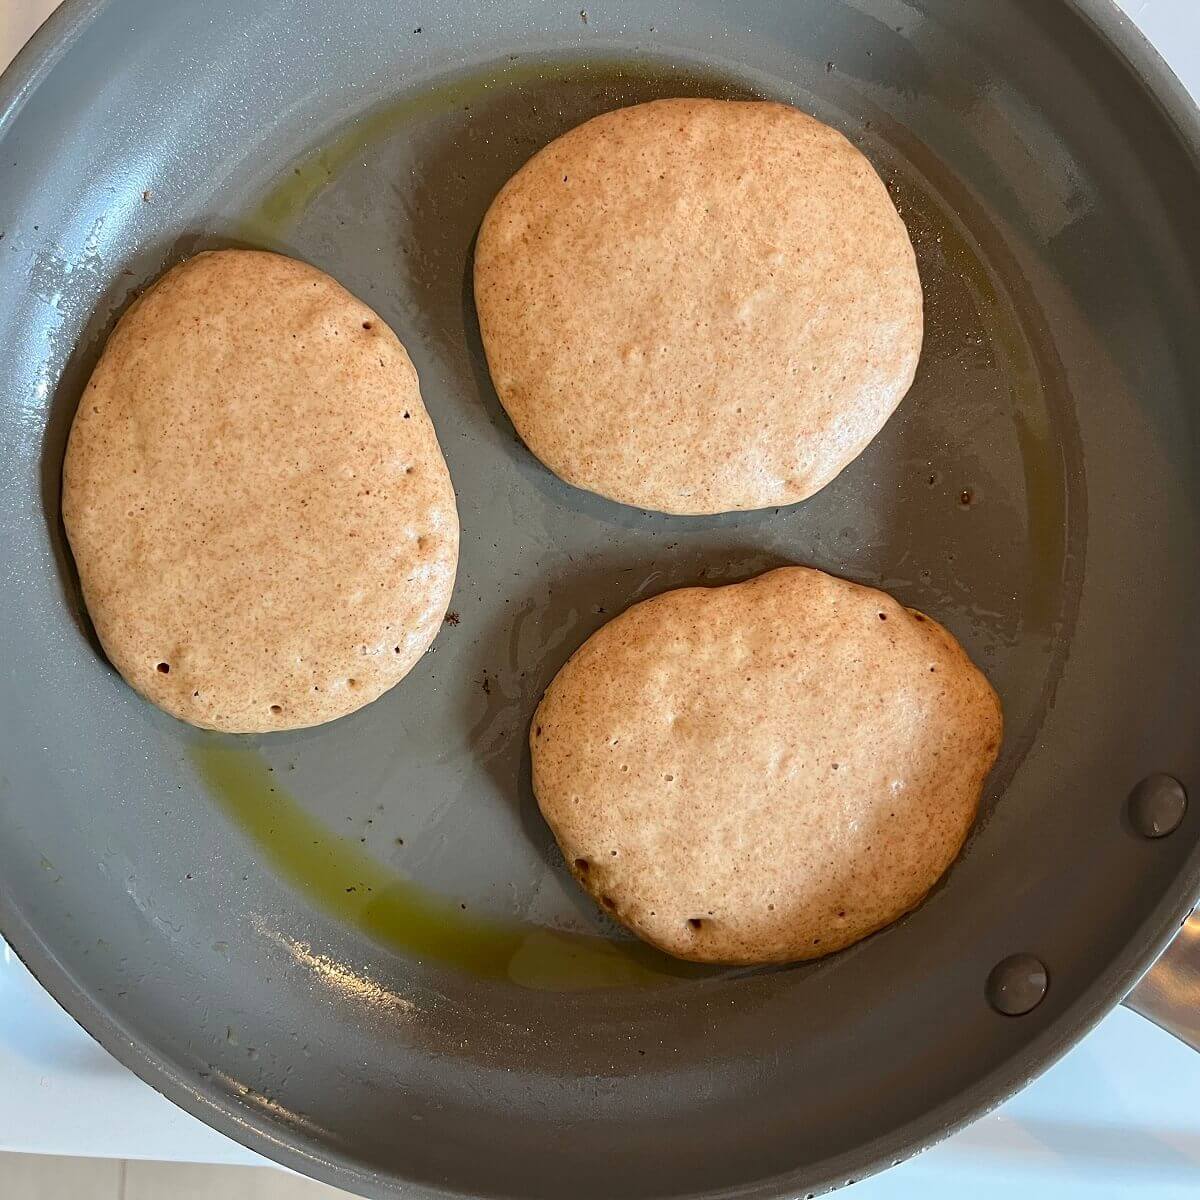 Pancakes ready to be flipped in a nonstick frying pan.